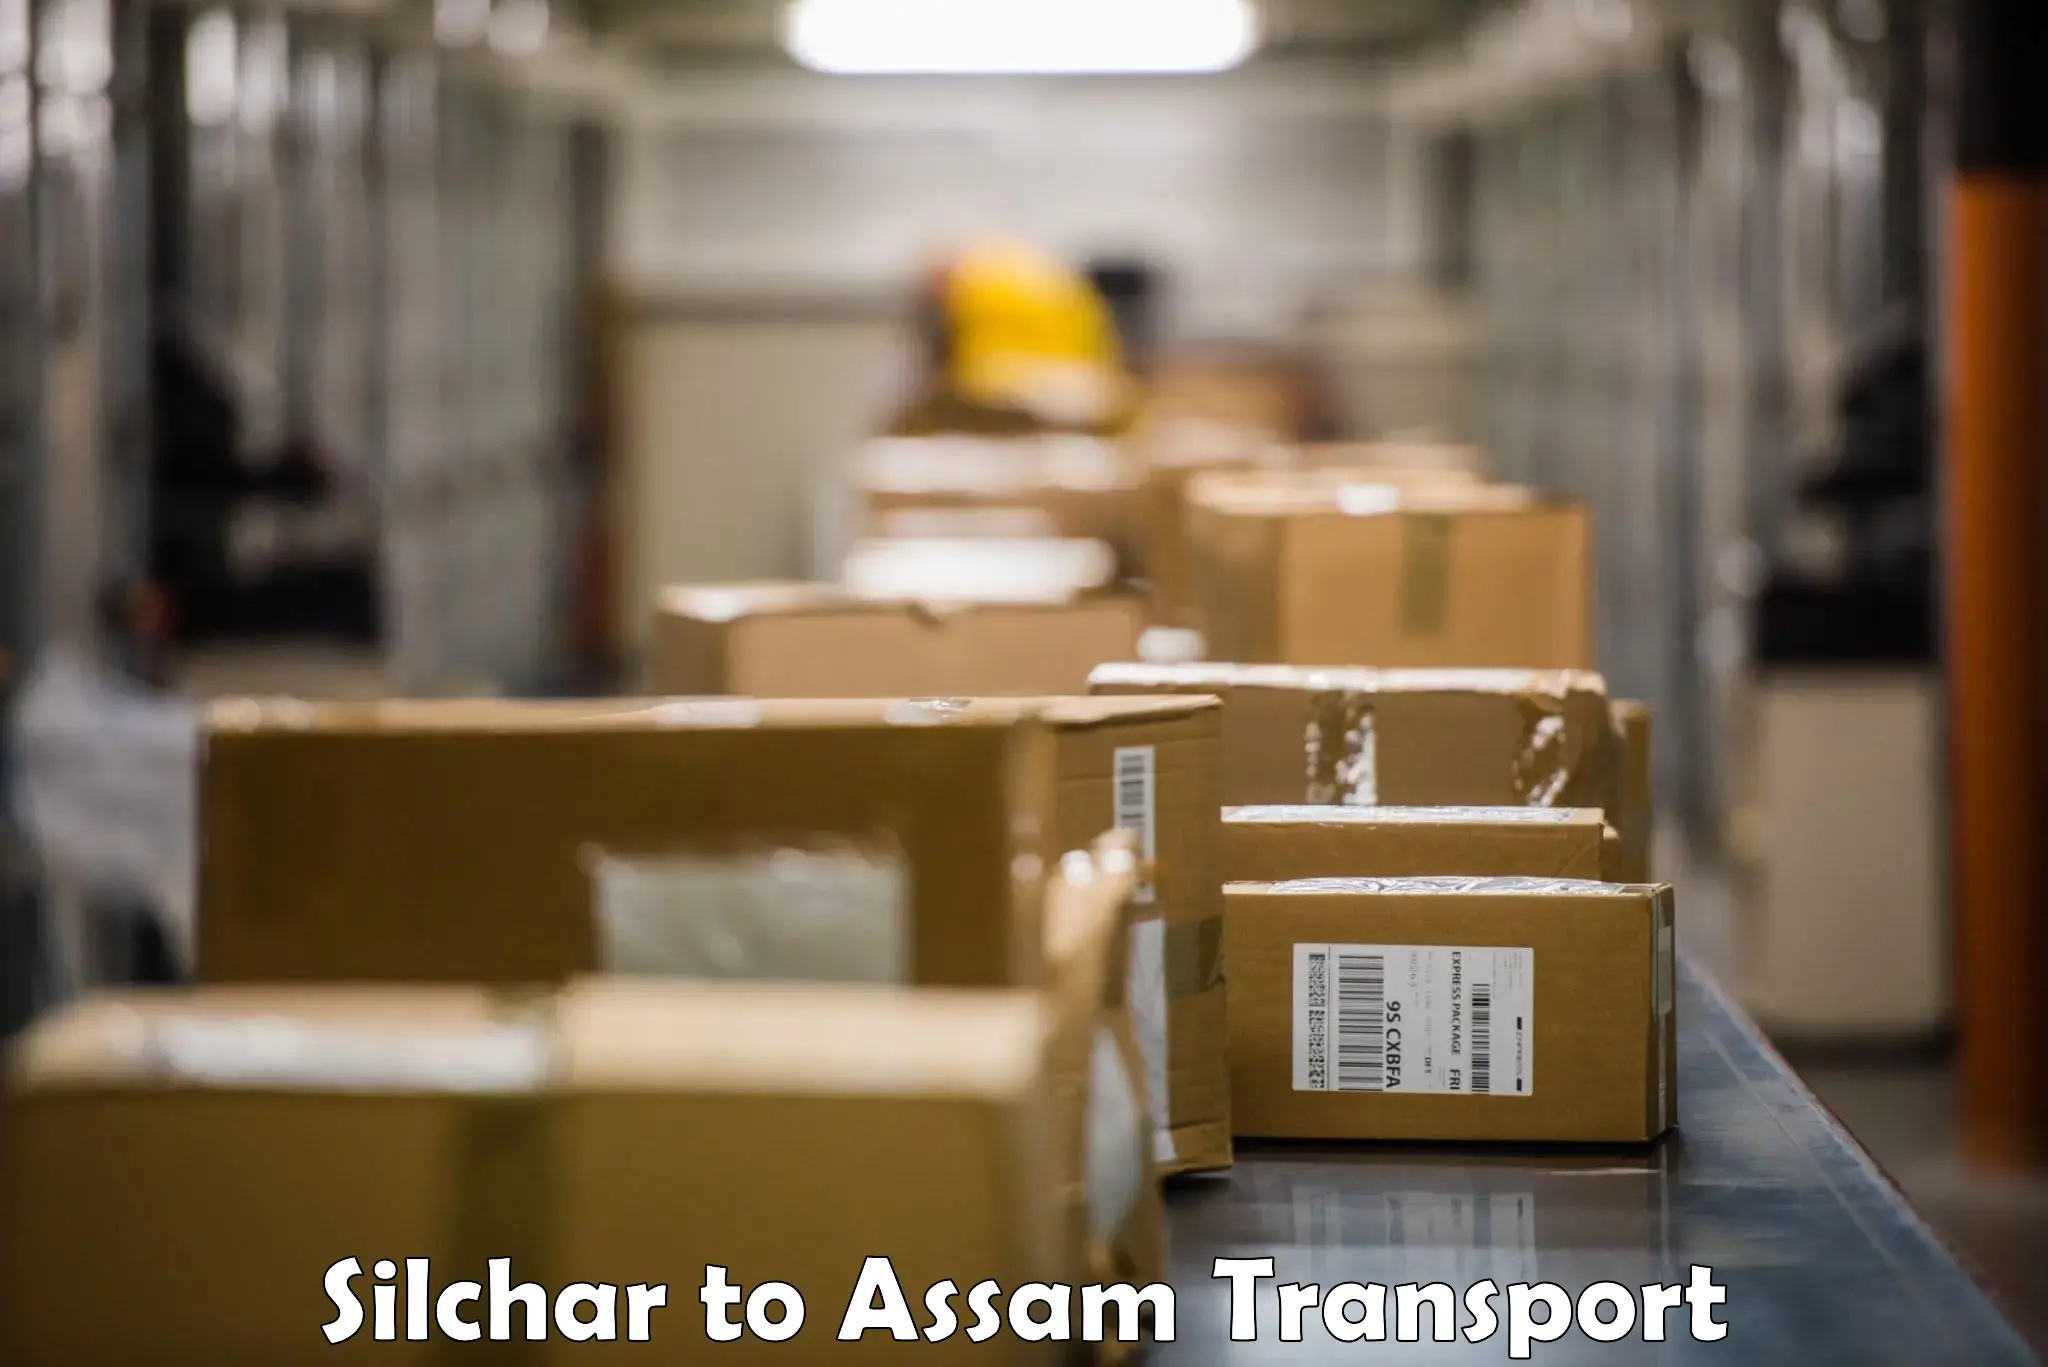 Commercial transport service Silchar to Silchar